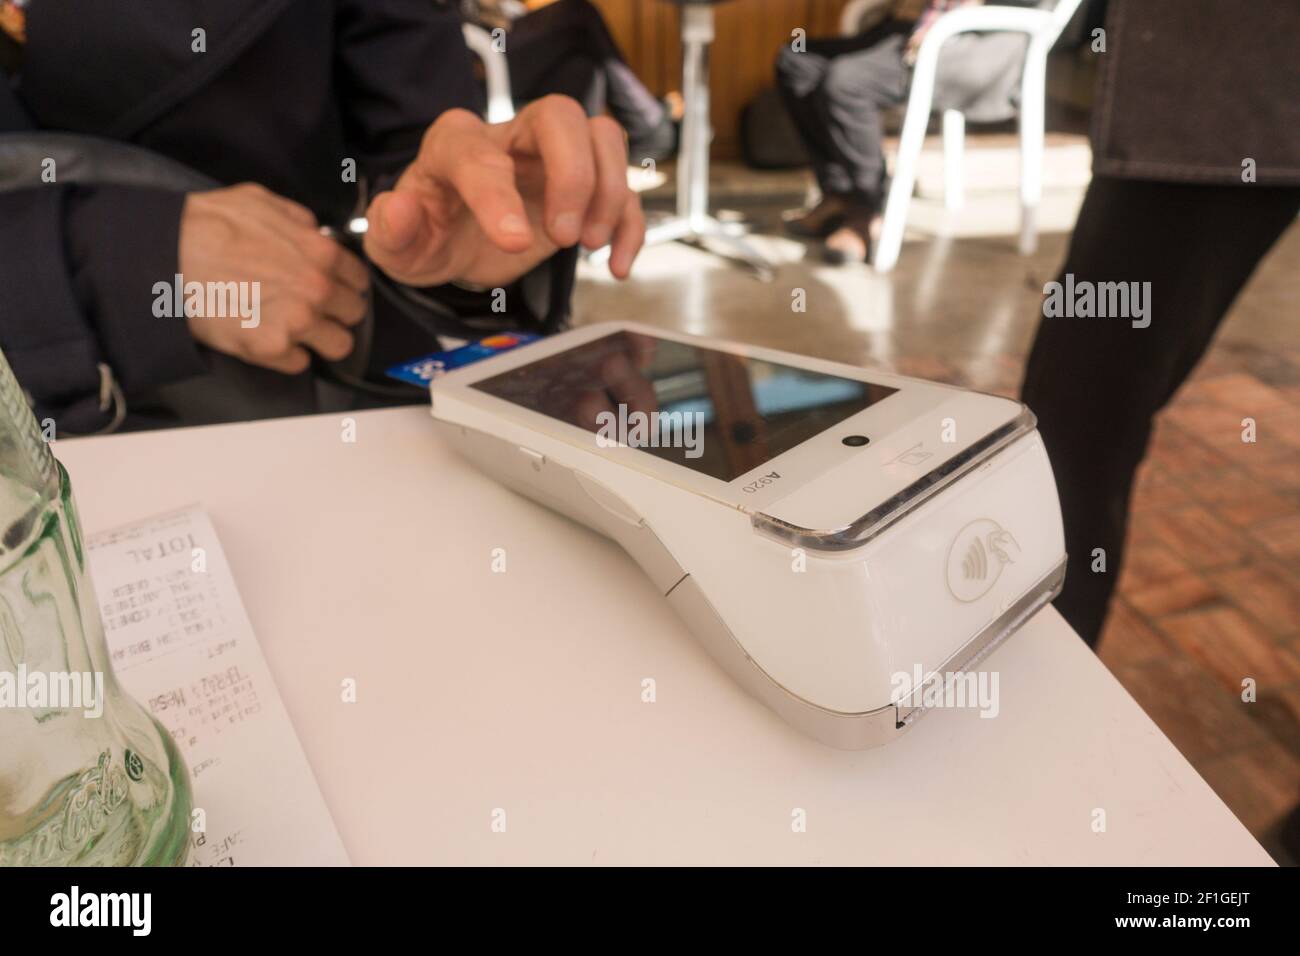 Woman authorises a payment using a payment terminal, POS terminal on a table in restaurant. Stock Photo